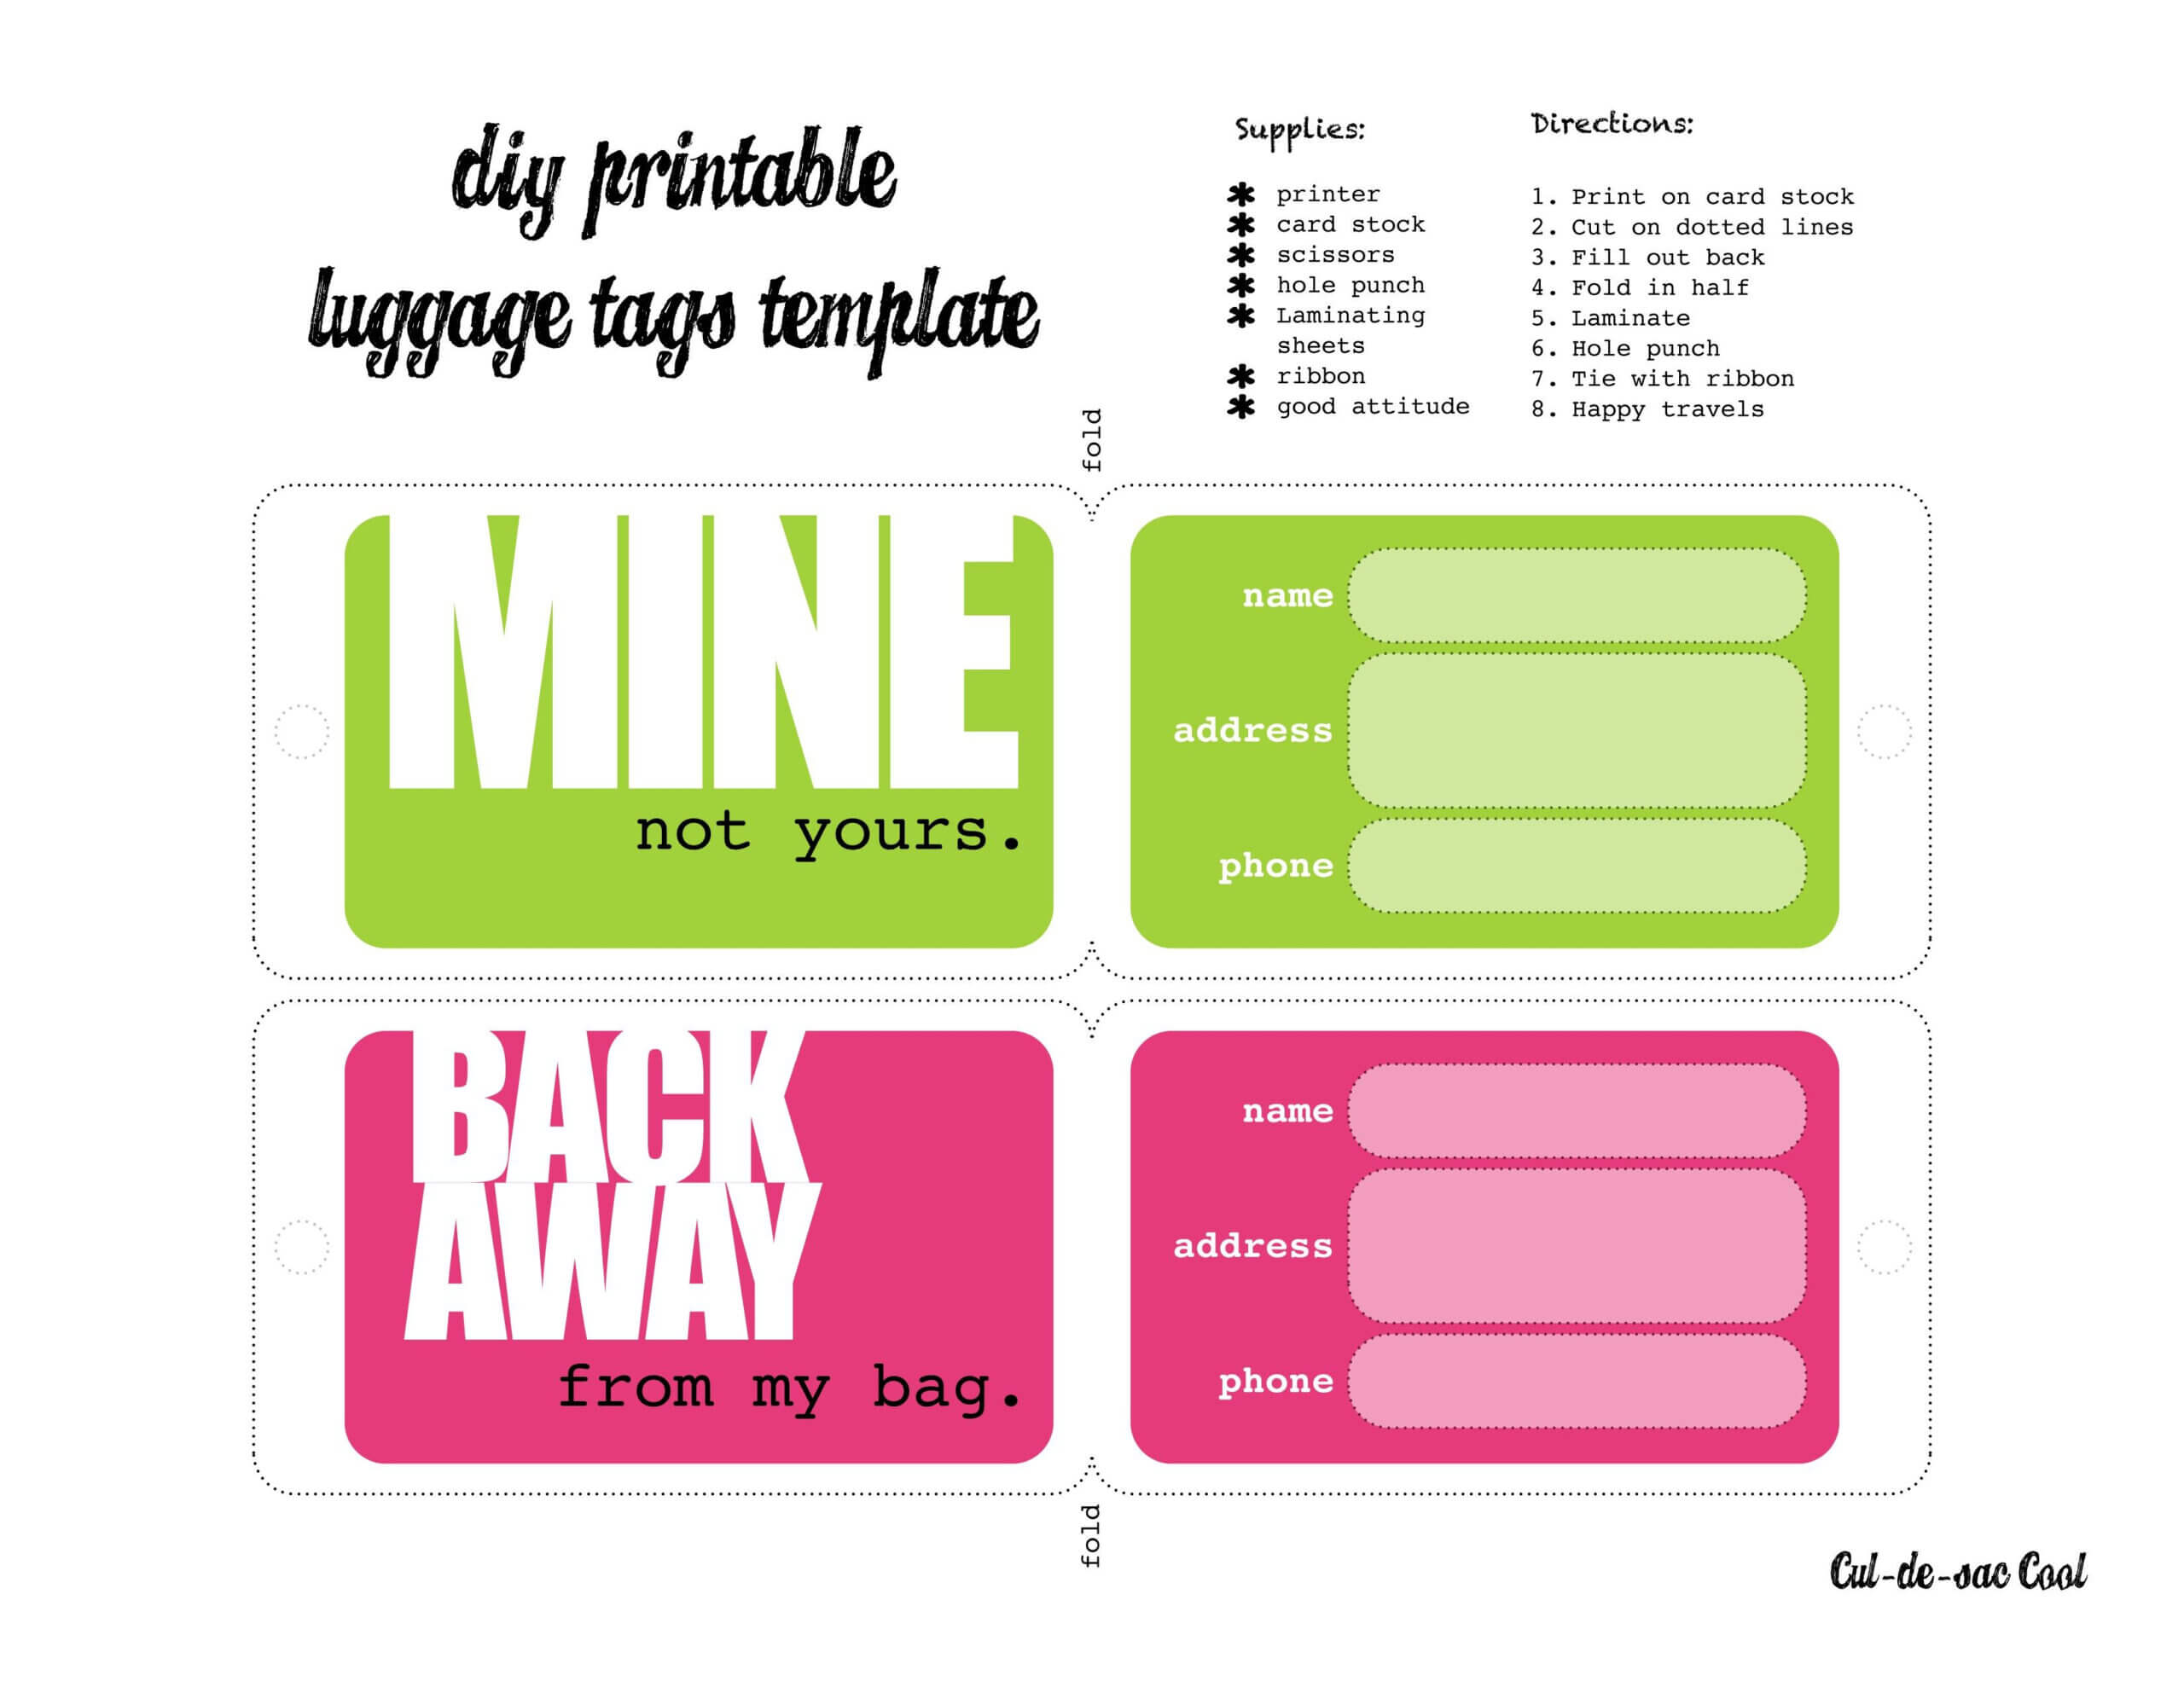 014 Word Name Tag Template Outstanding Ideas Microsoft 2010 Pertaining To Name Tag Template Word 2010